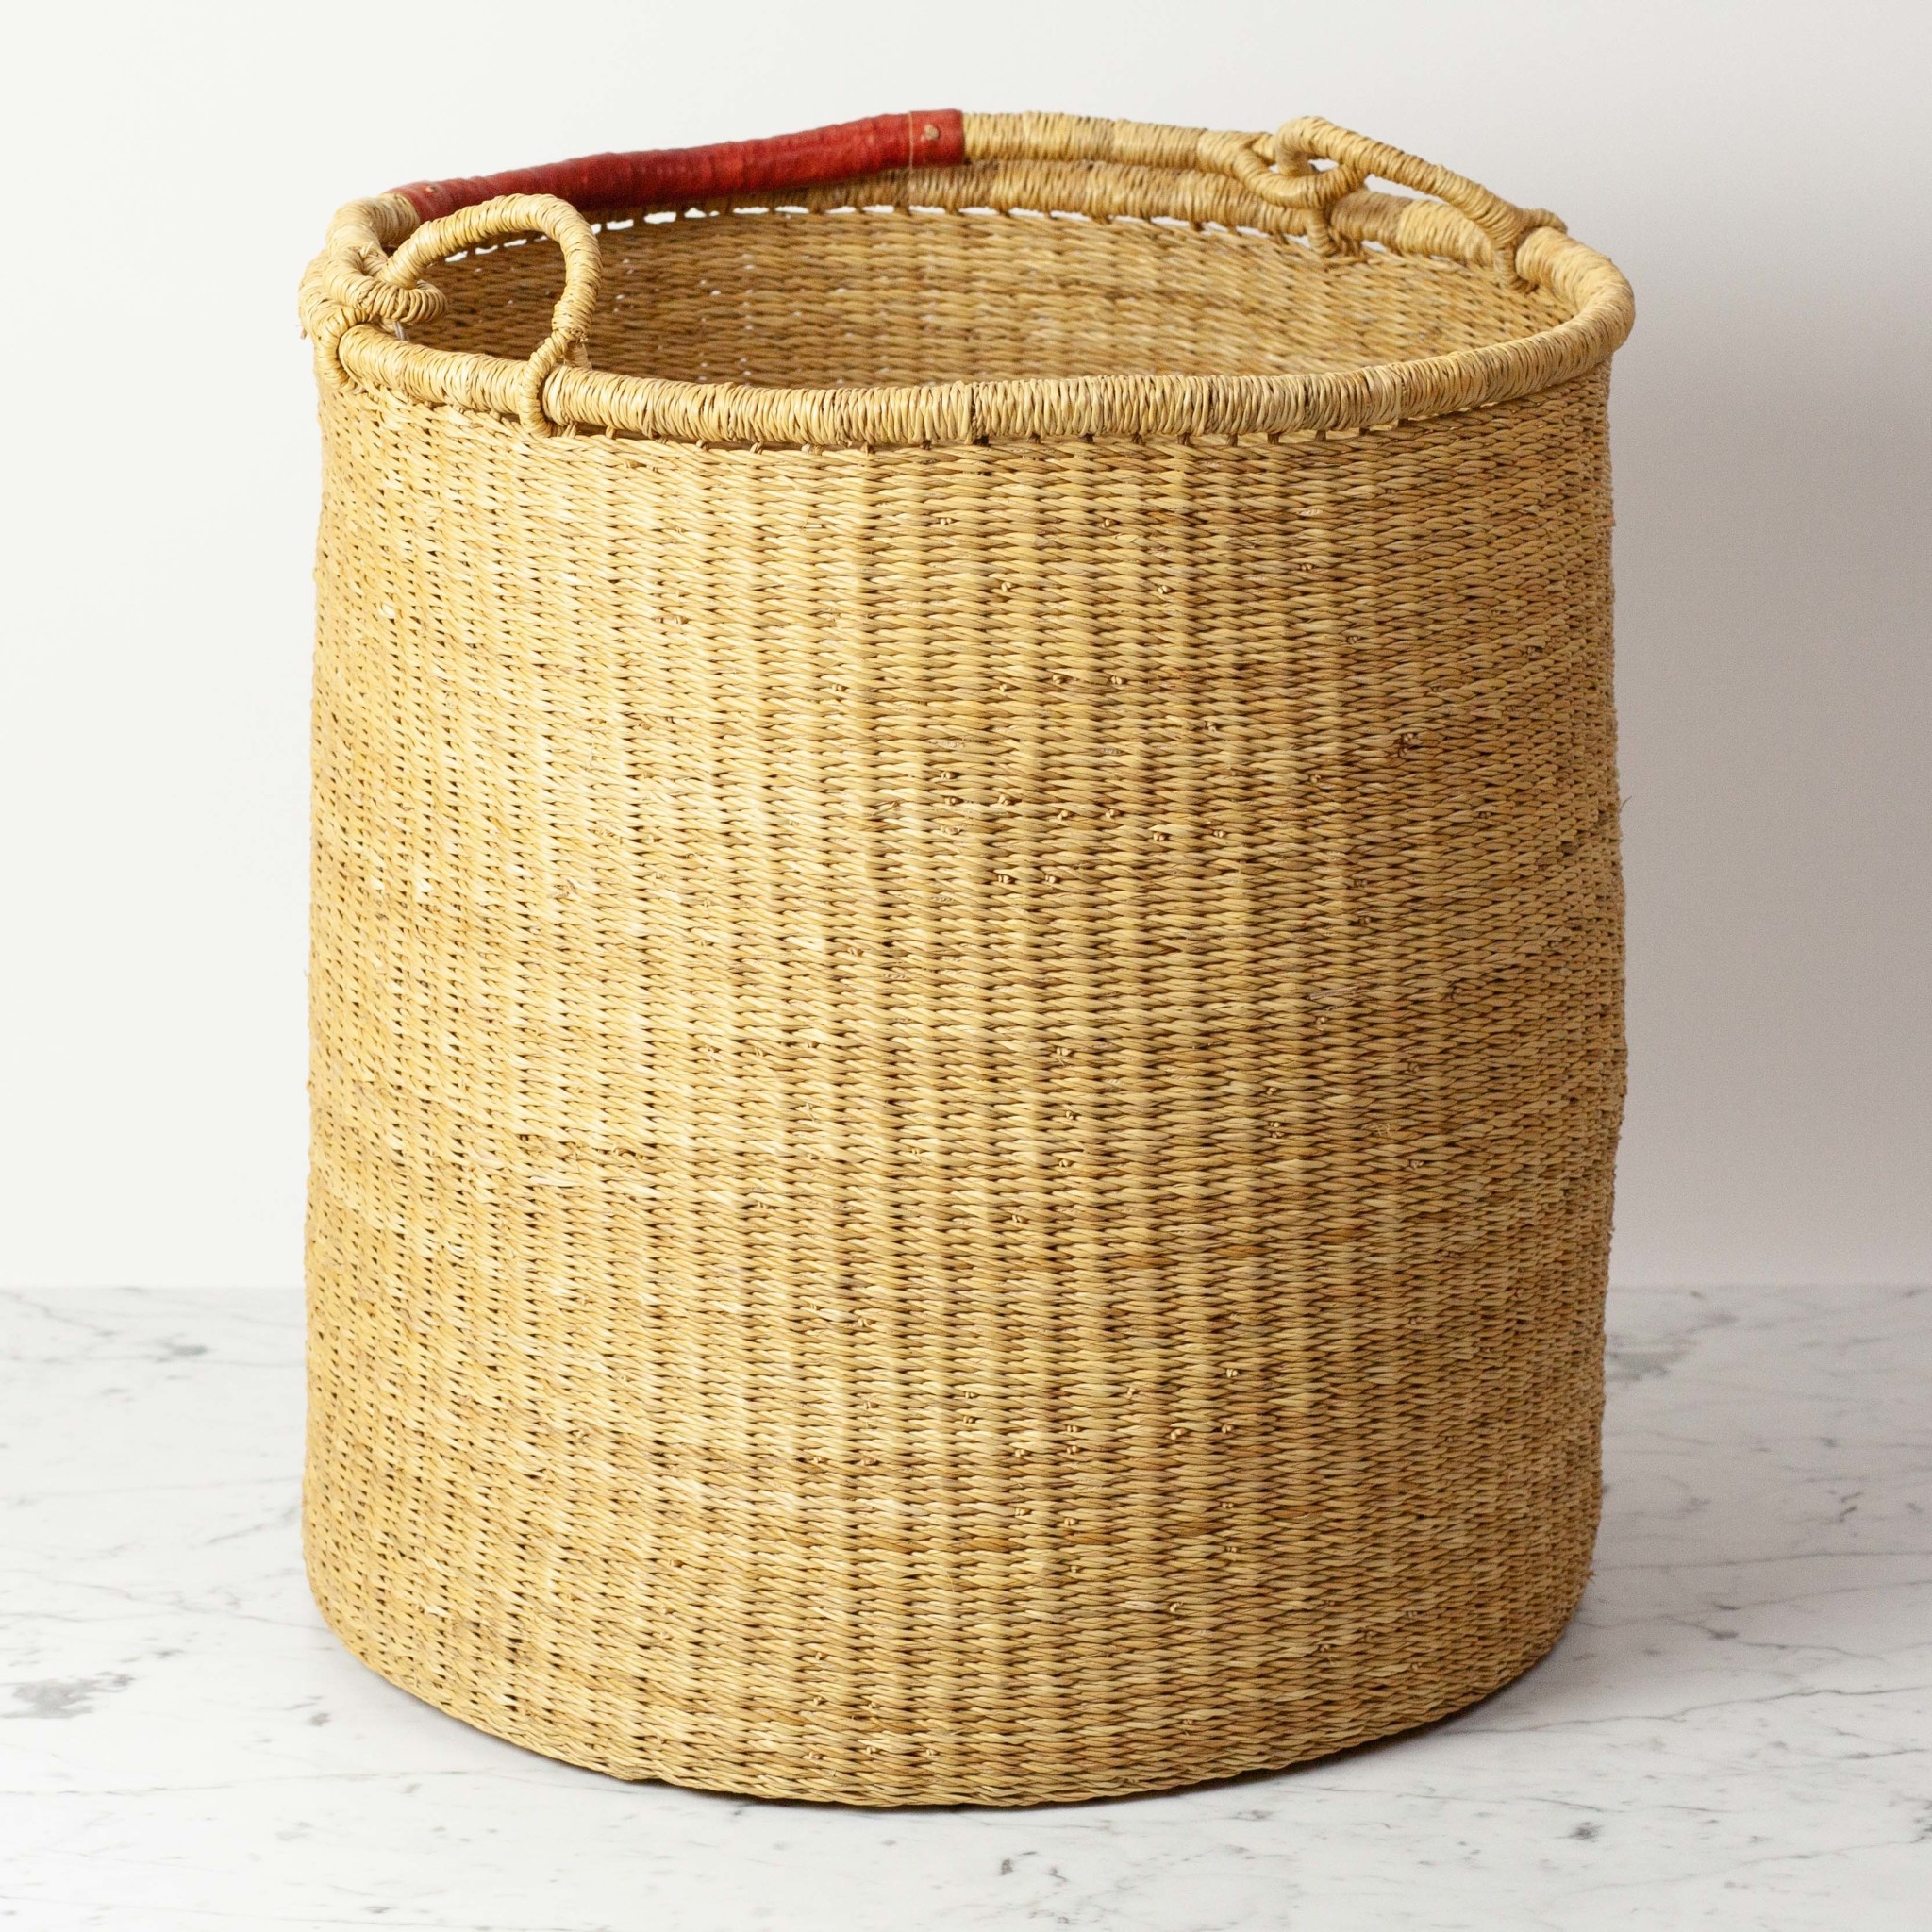 Tall Grass Hamper Basket with Leather Handle - Large - 19" x 18"